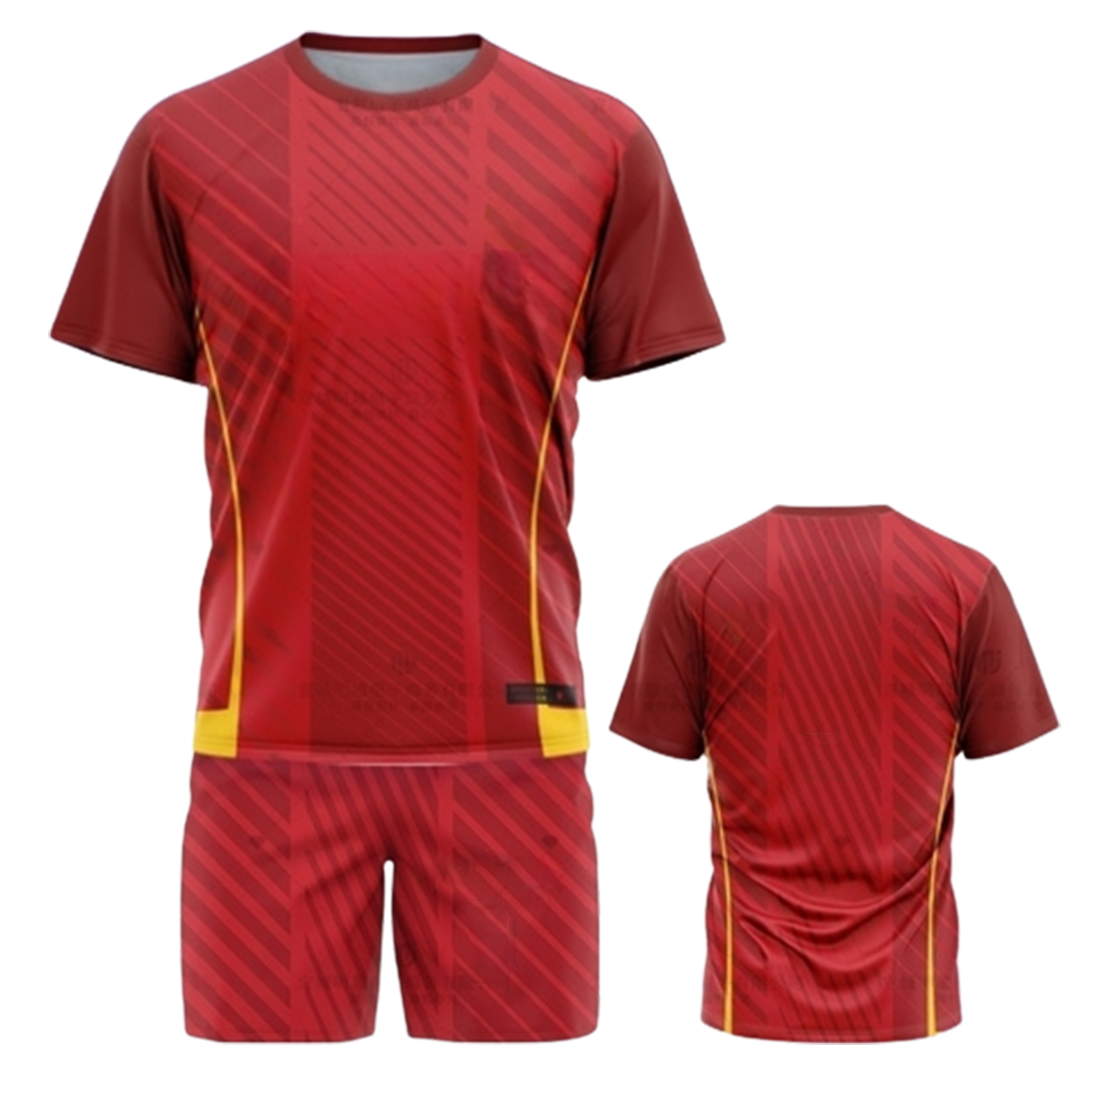 NEXTPRINT Customized Sublimation Printed T-Shirt Unisex Sports Jersey Player Name & Number, Team Name .Design 1